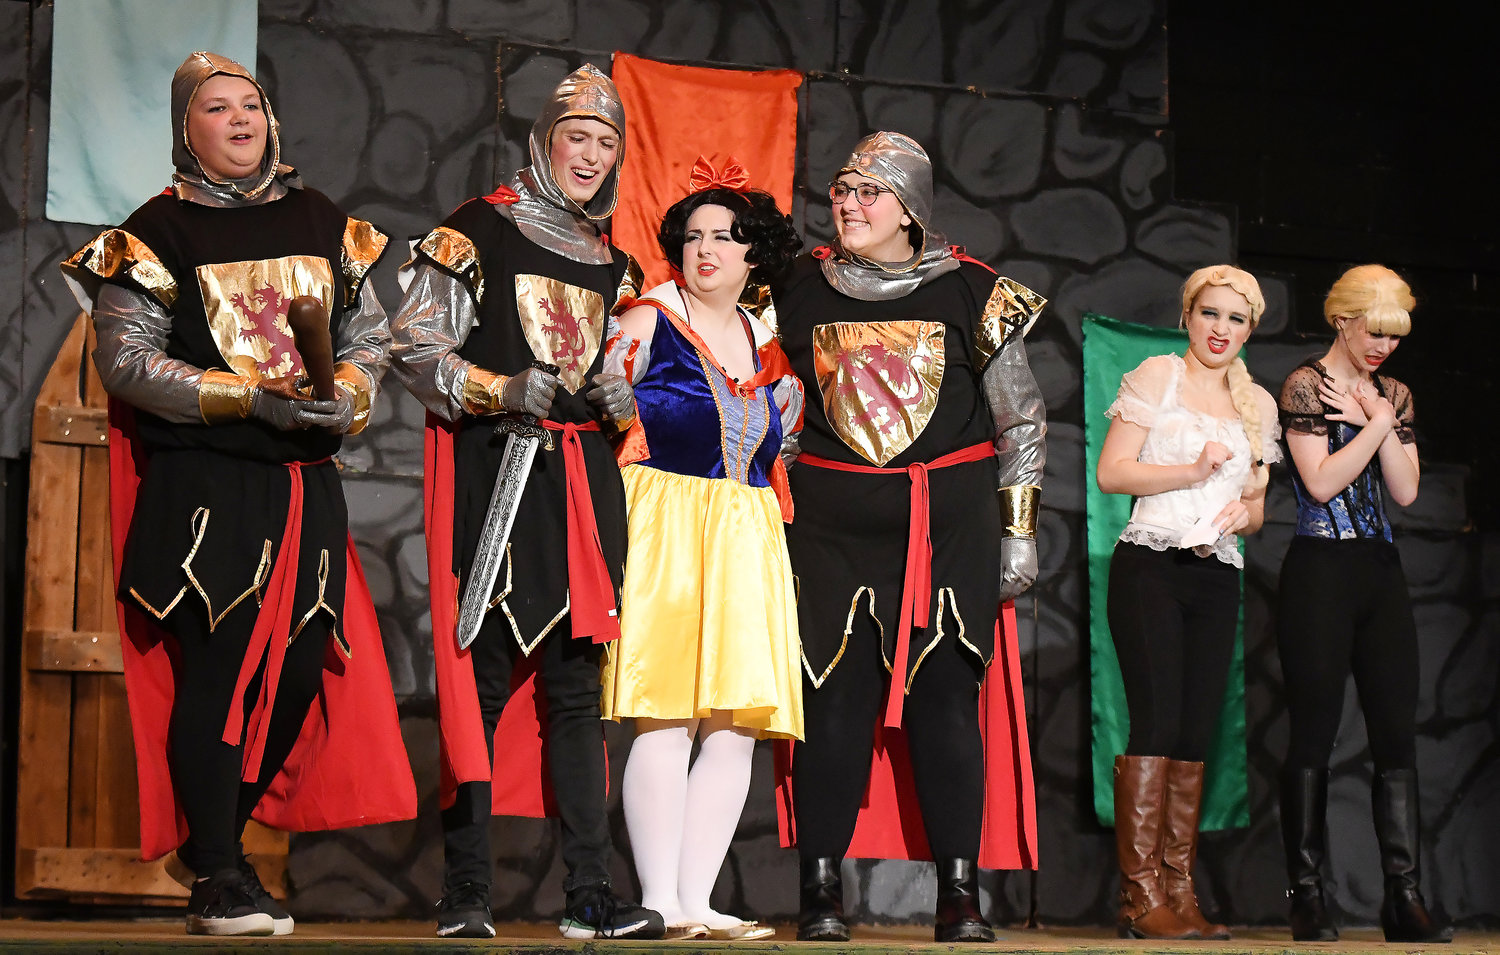 Lauren Shields, as Snow White, is detained by the guards.